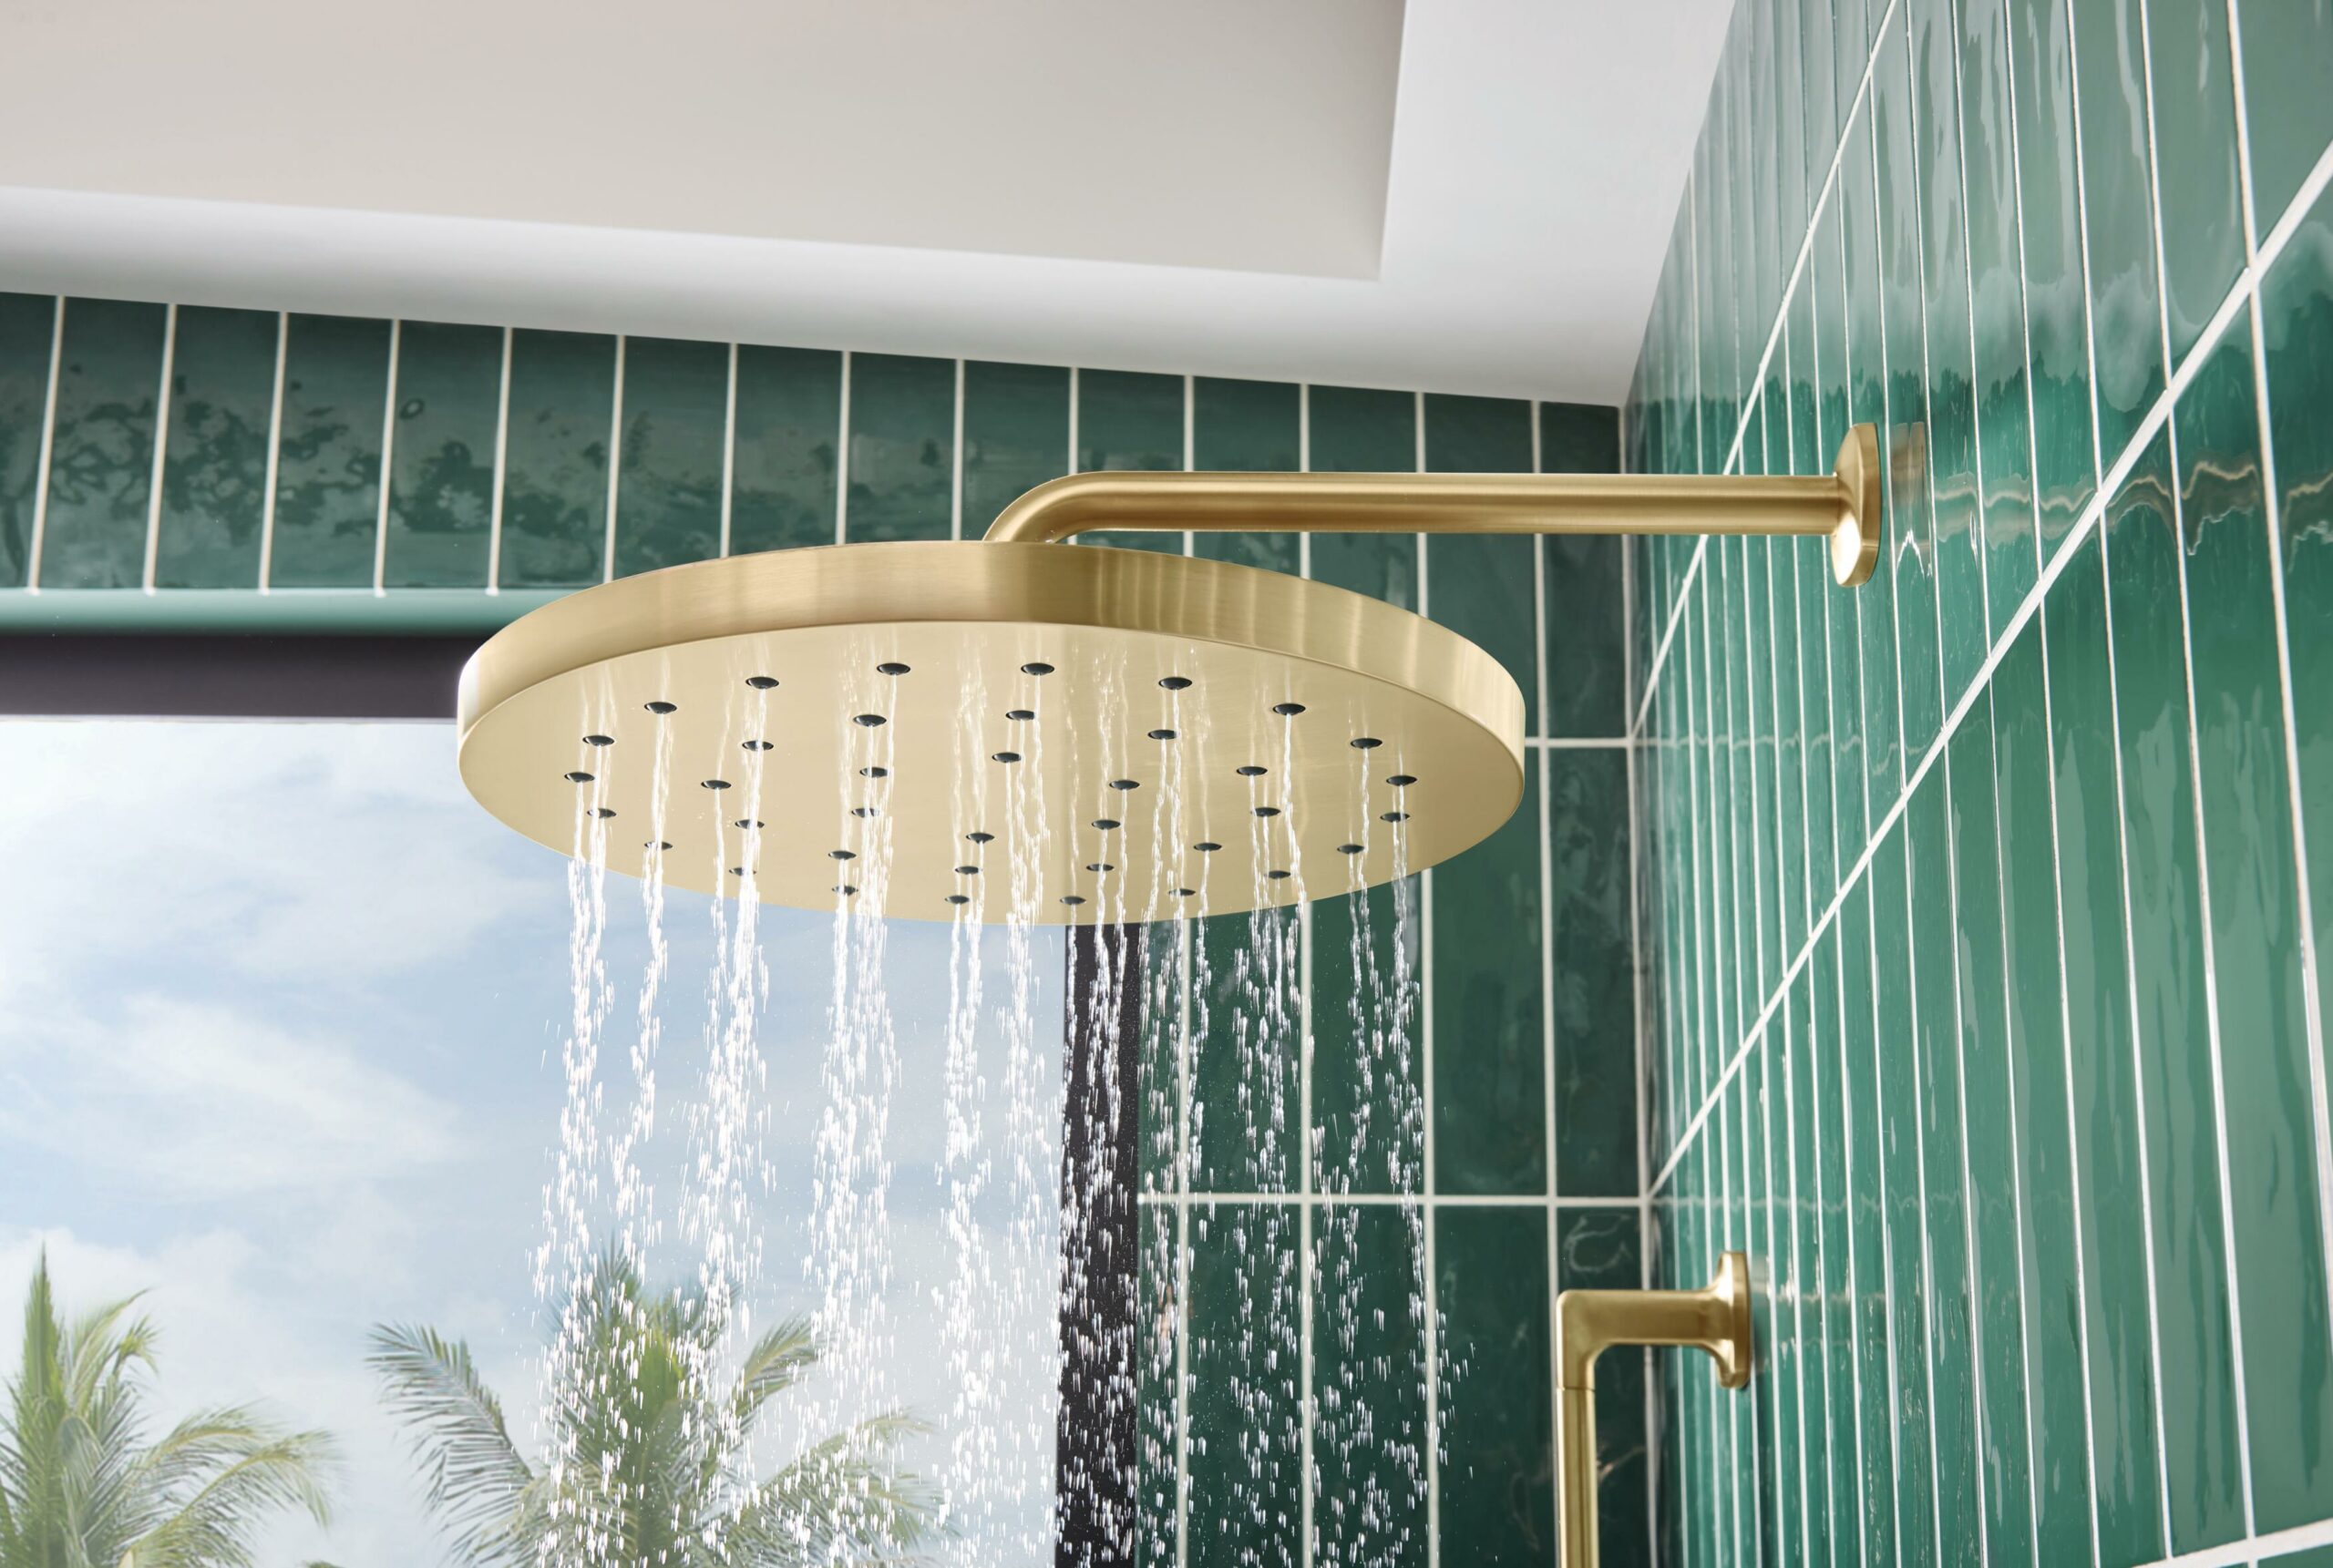 Water efficient shower head in gold against green tile in a modern bathroom design